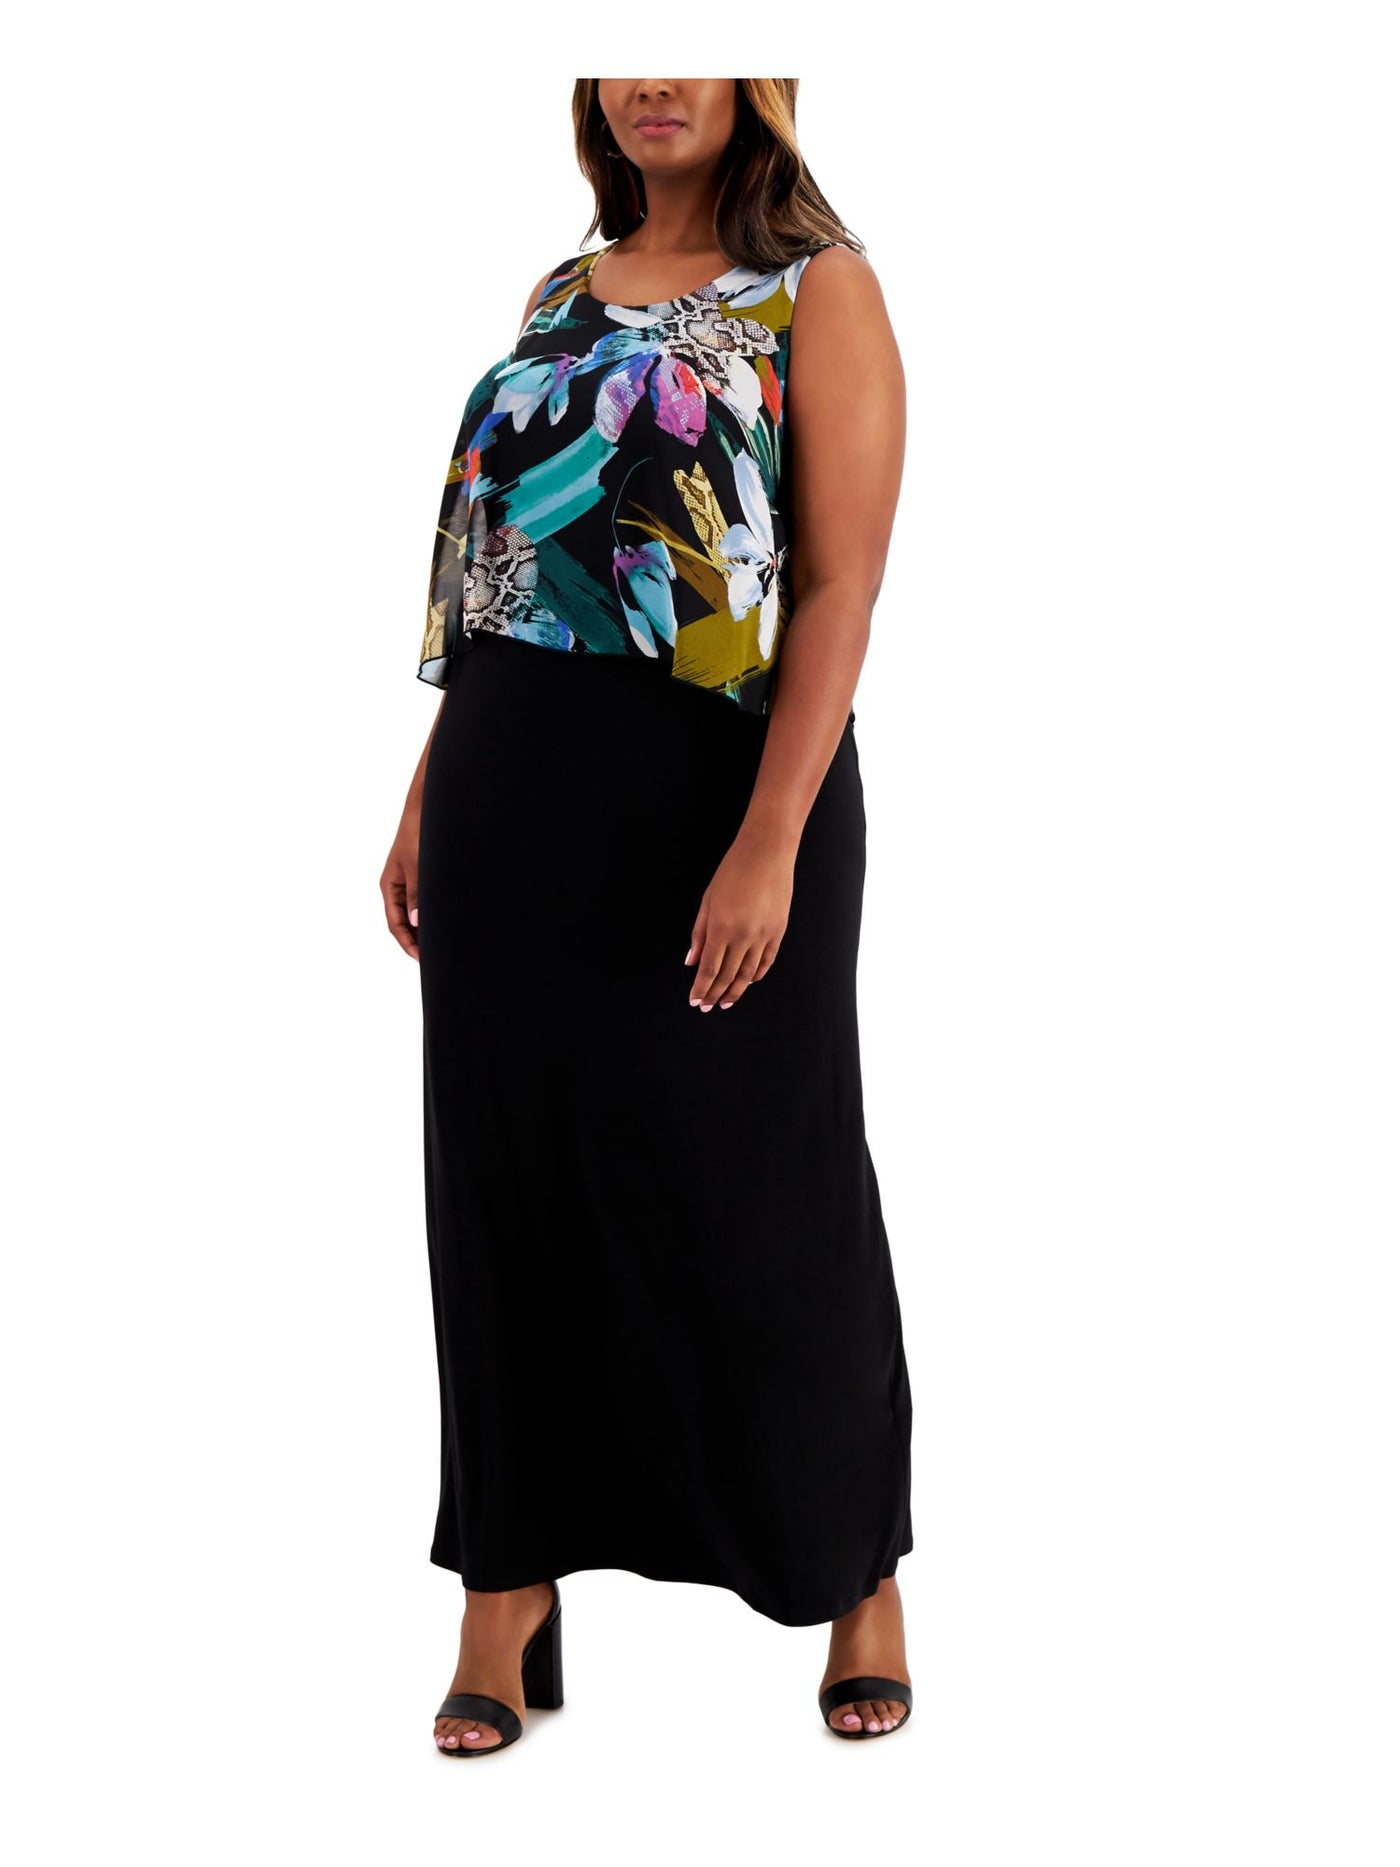 CONNECTED APPAREL Womens Black Stretch Printed Sleeveless Scoop Neck Maxi Evening Dress Plus 24W